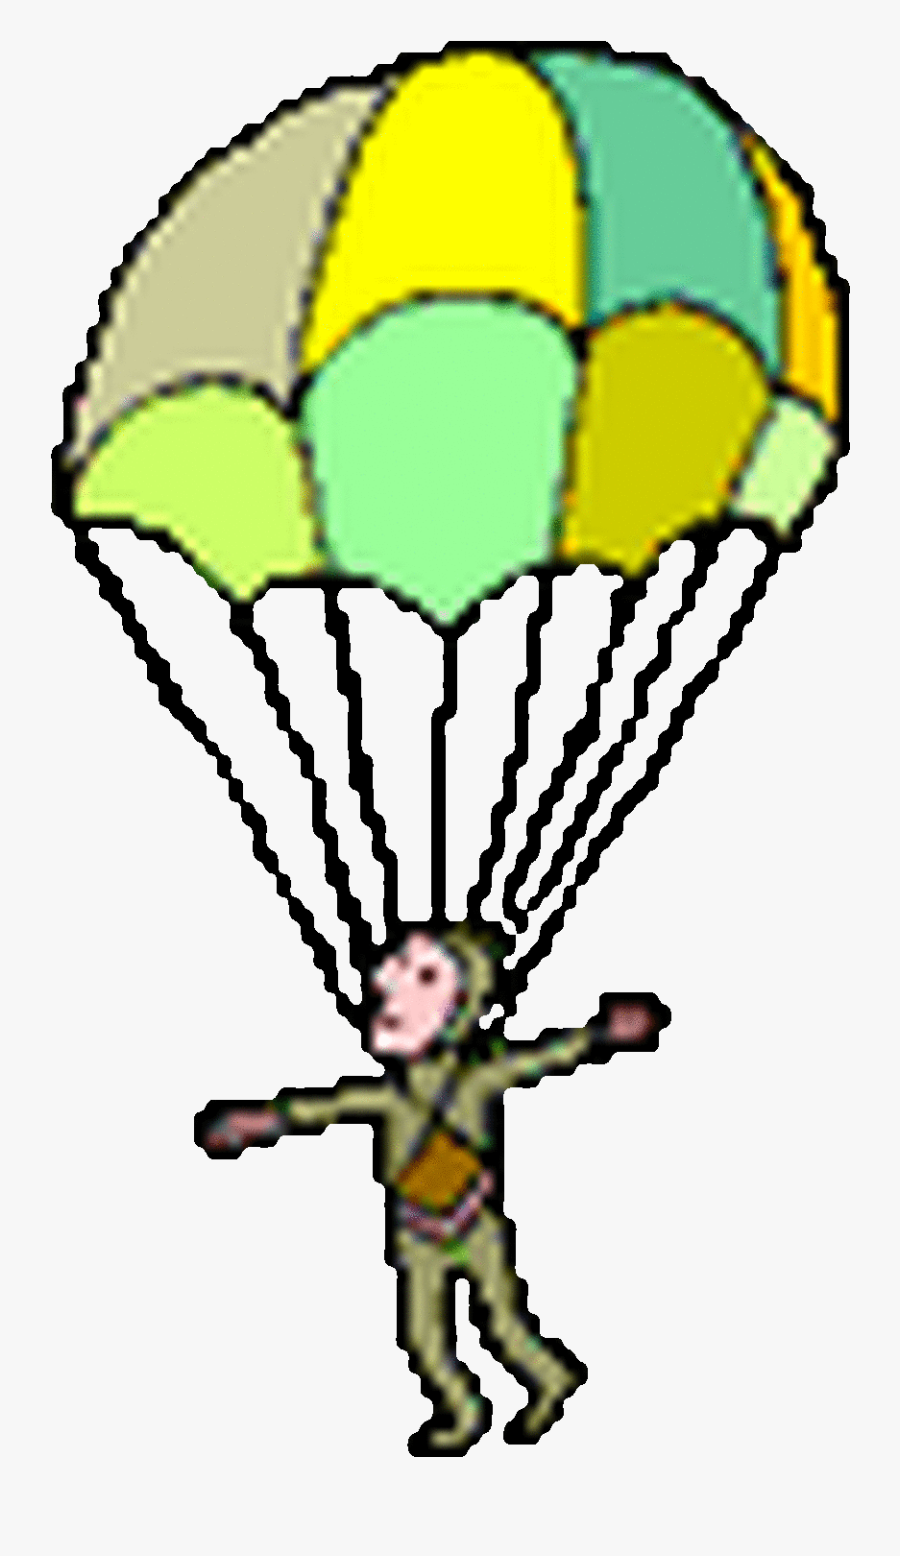 Parachute Push Or Pull Clipart , Png Download - Parachute Push Or Pull, Transparent Clipart